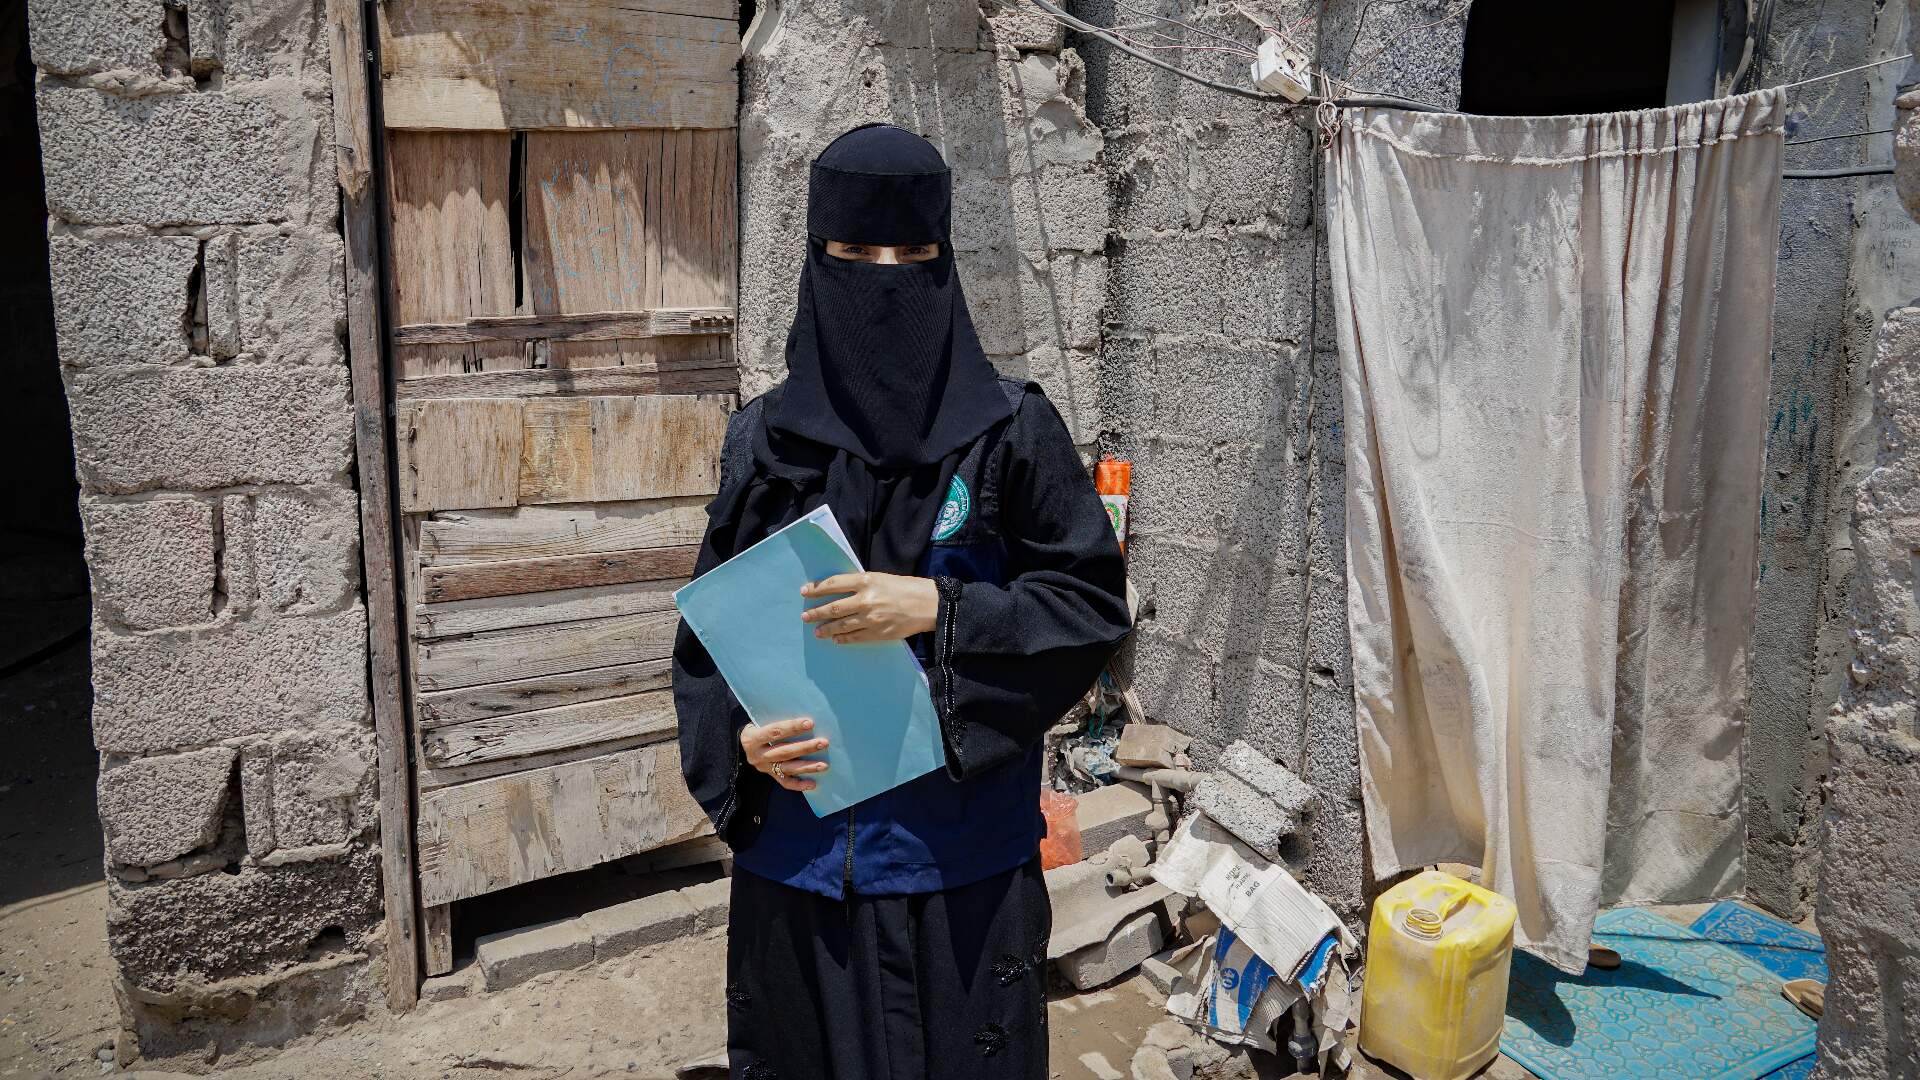 A female community health volunteer, dressed in a burqa, poses for the camera